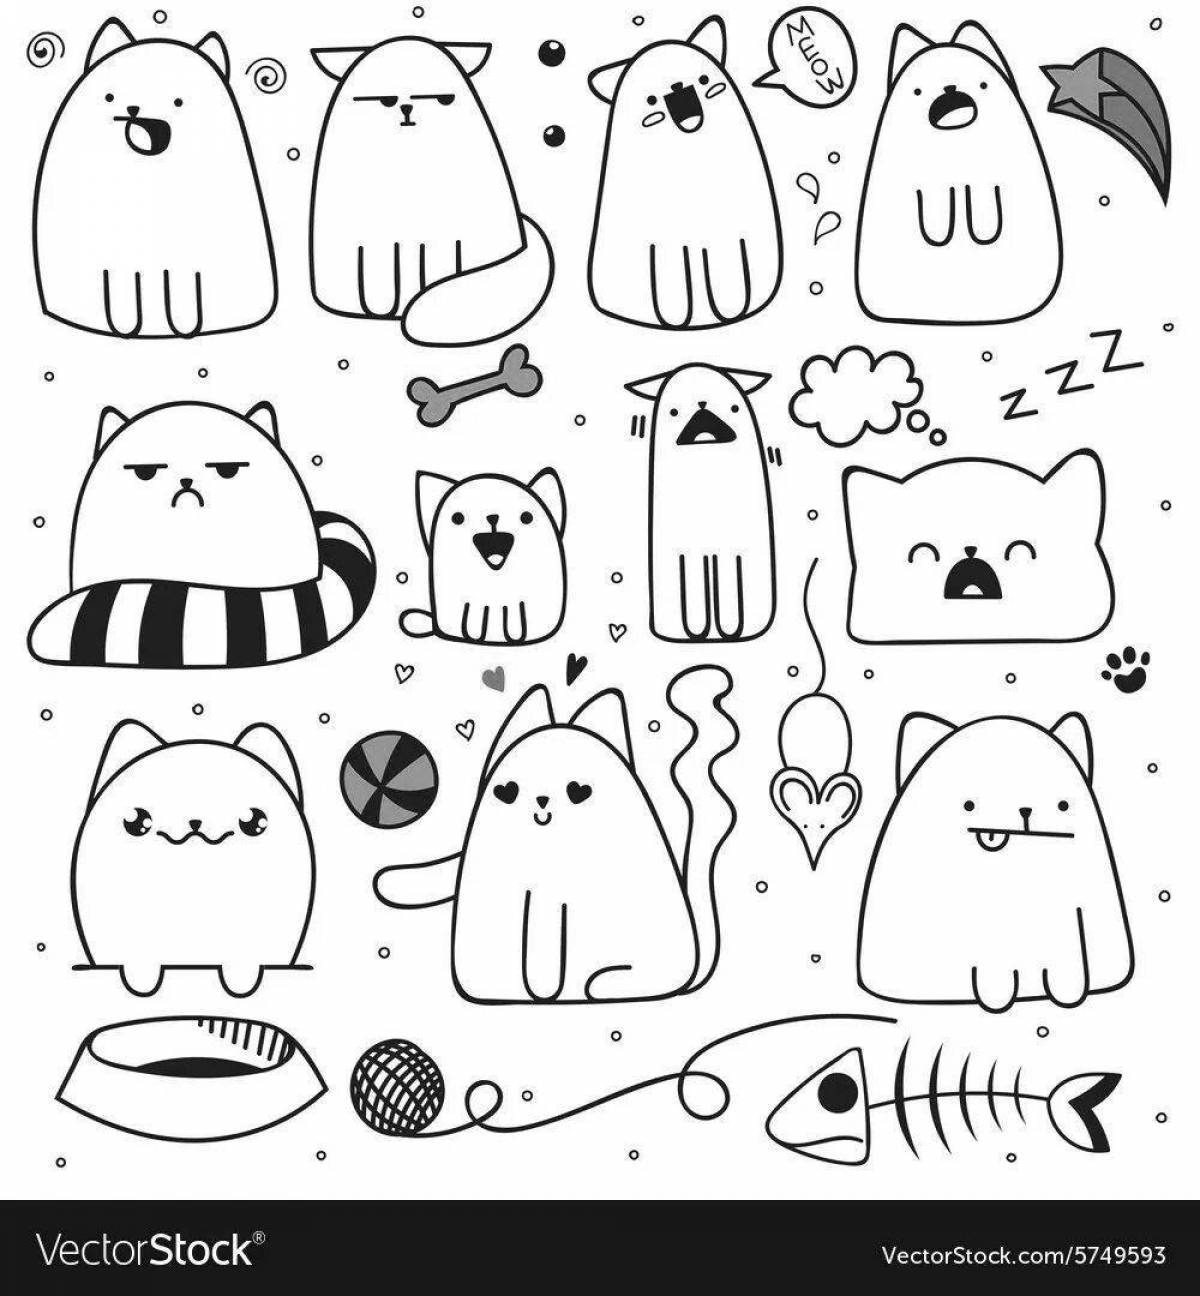 Quirky cat sticker coloring page